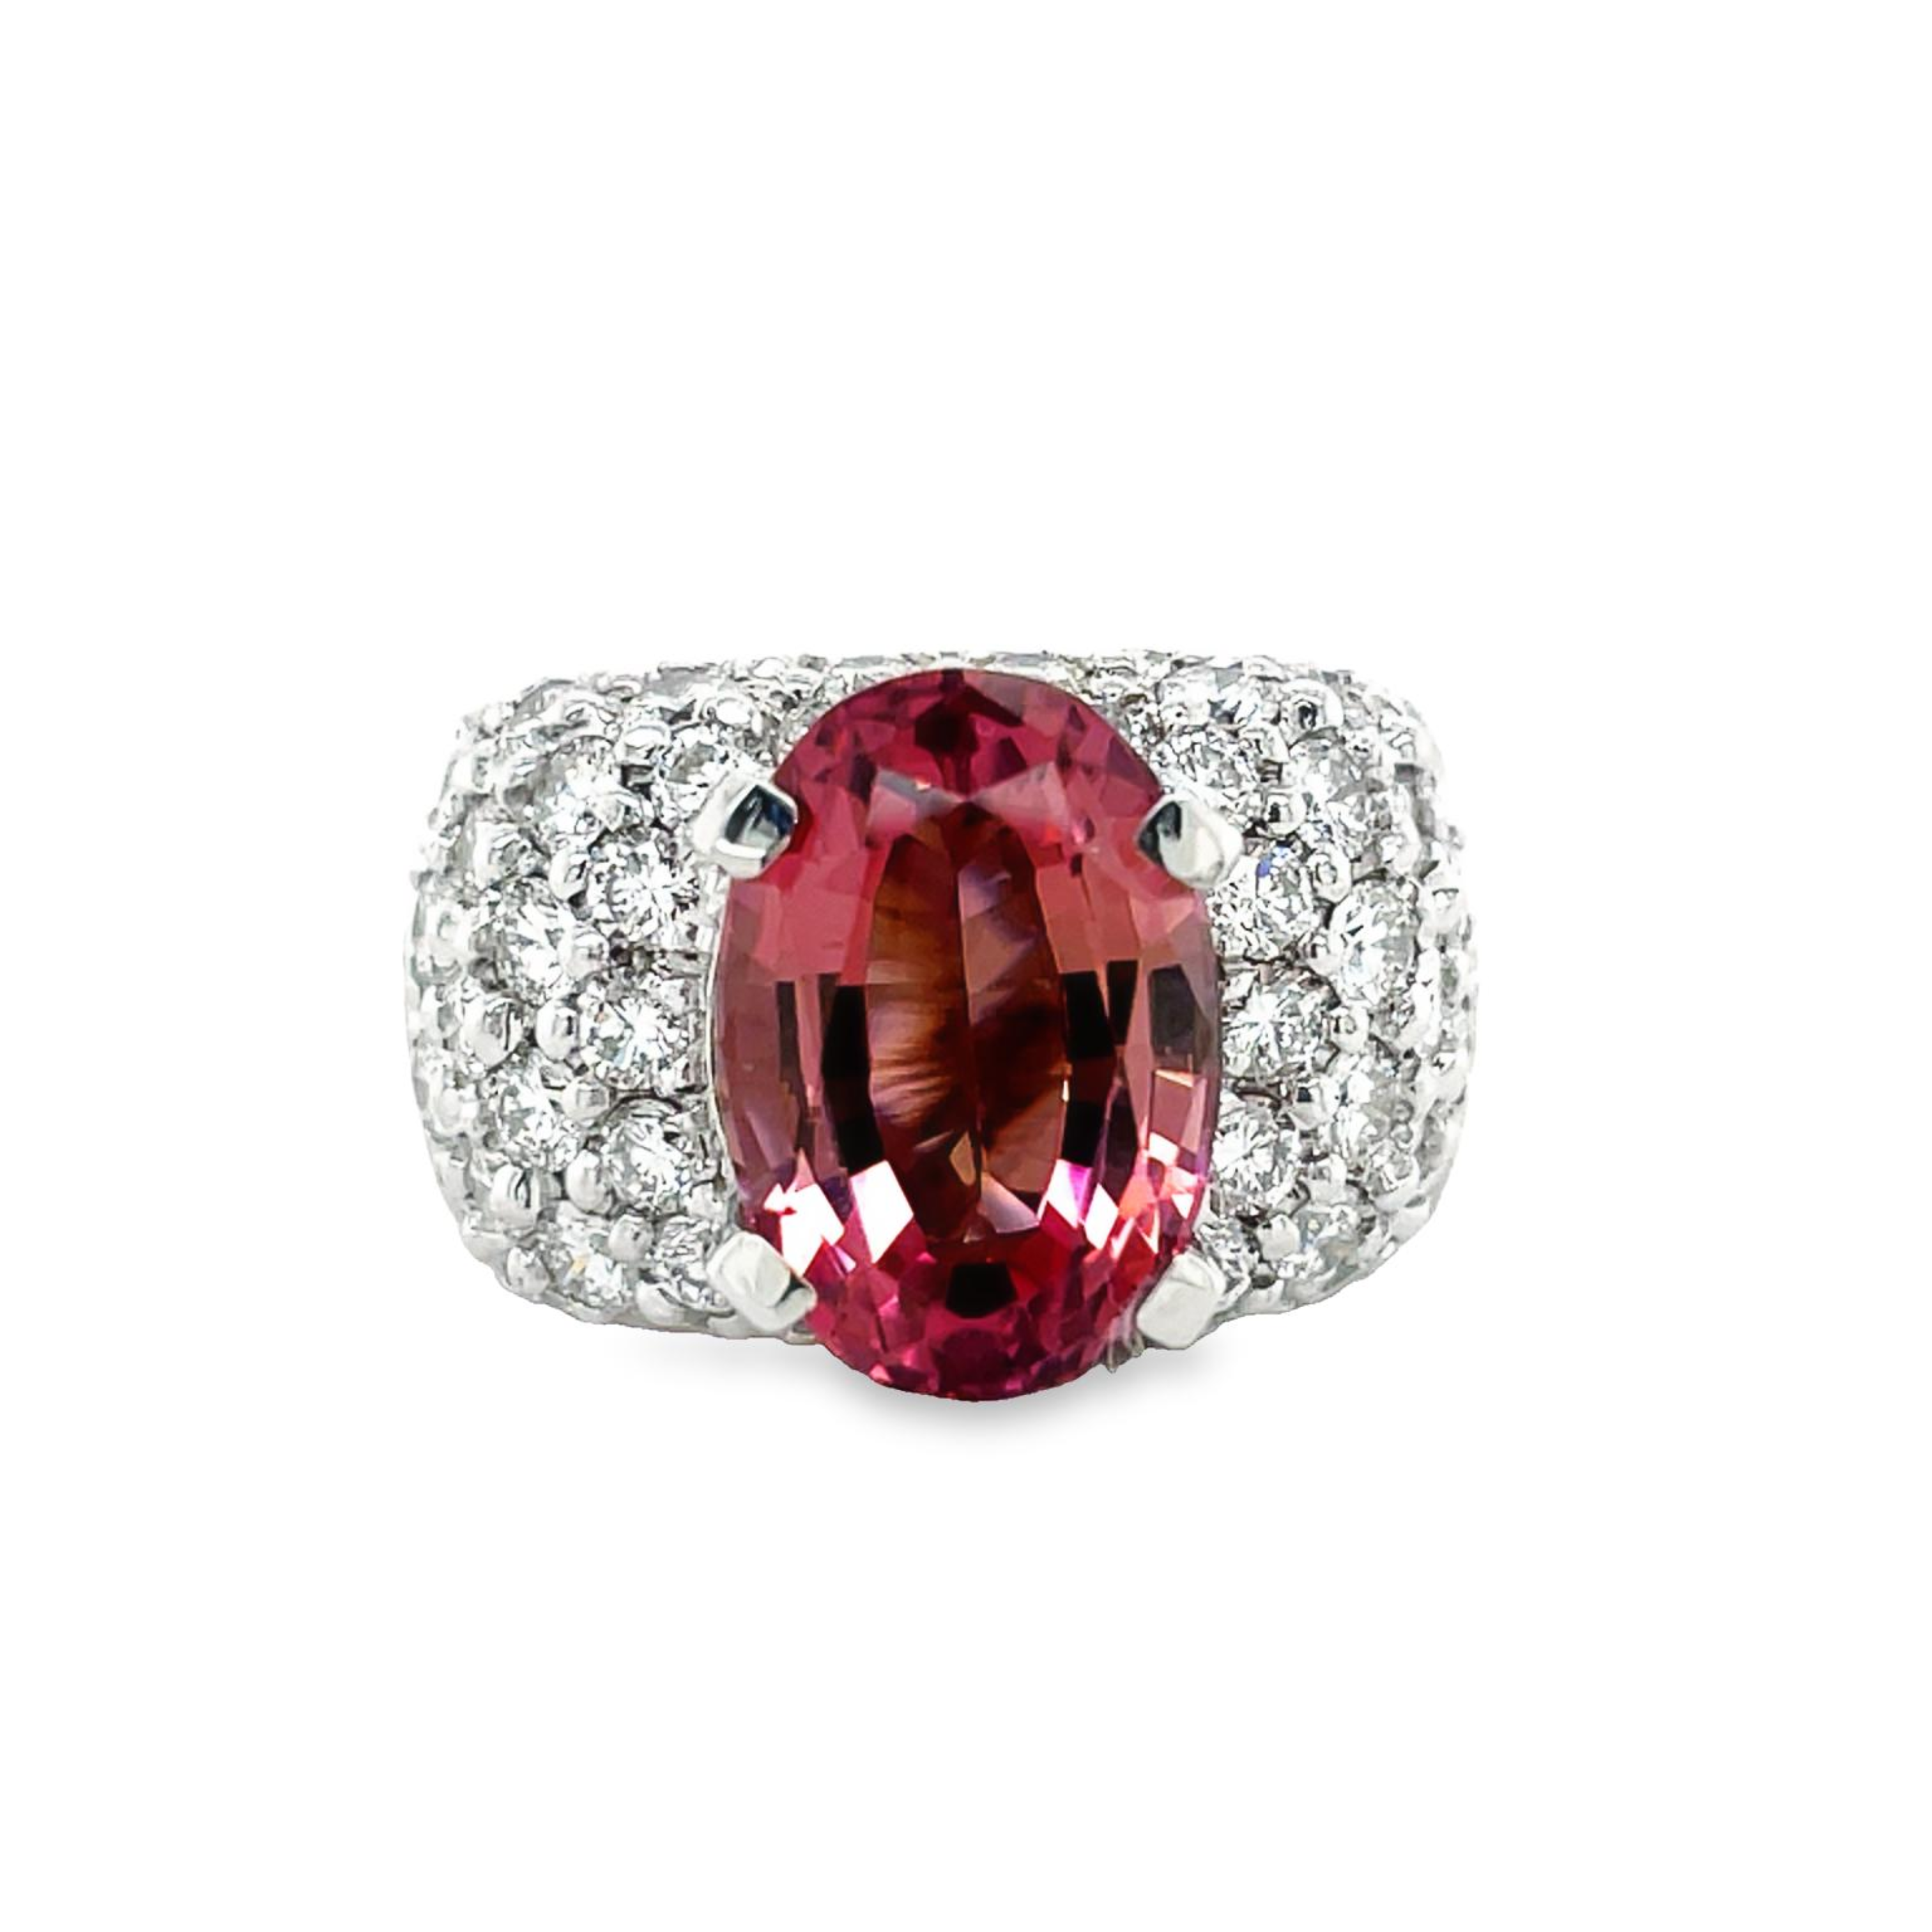 14k white gold  7.0 size (sizable)  Thick & wide ring   Faceted tourmaline 5.21 cts  Oval tourmaline measuring 12.80 mm   Round diamonds 2.00 cts  12.00 mm wide